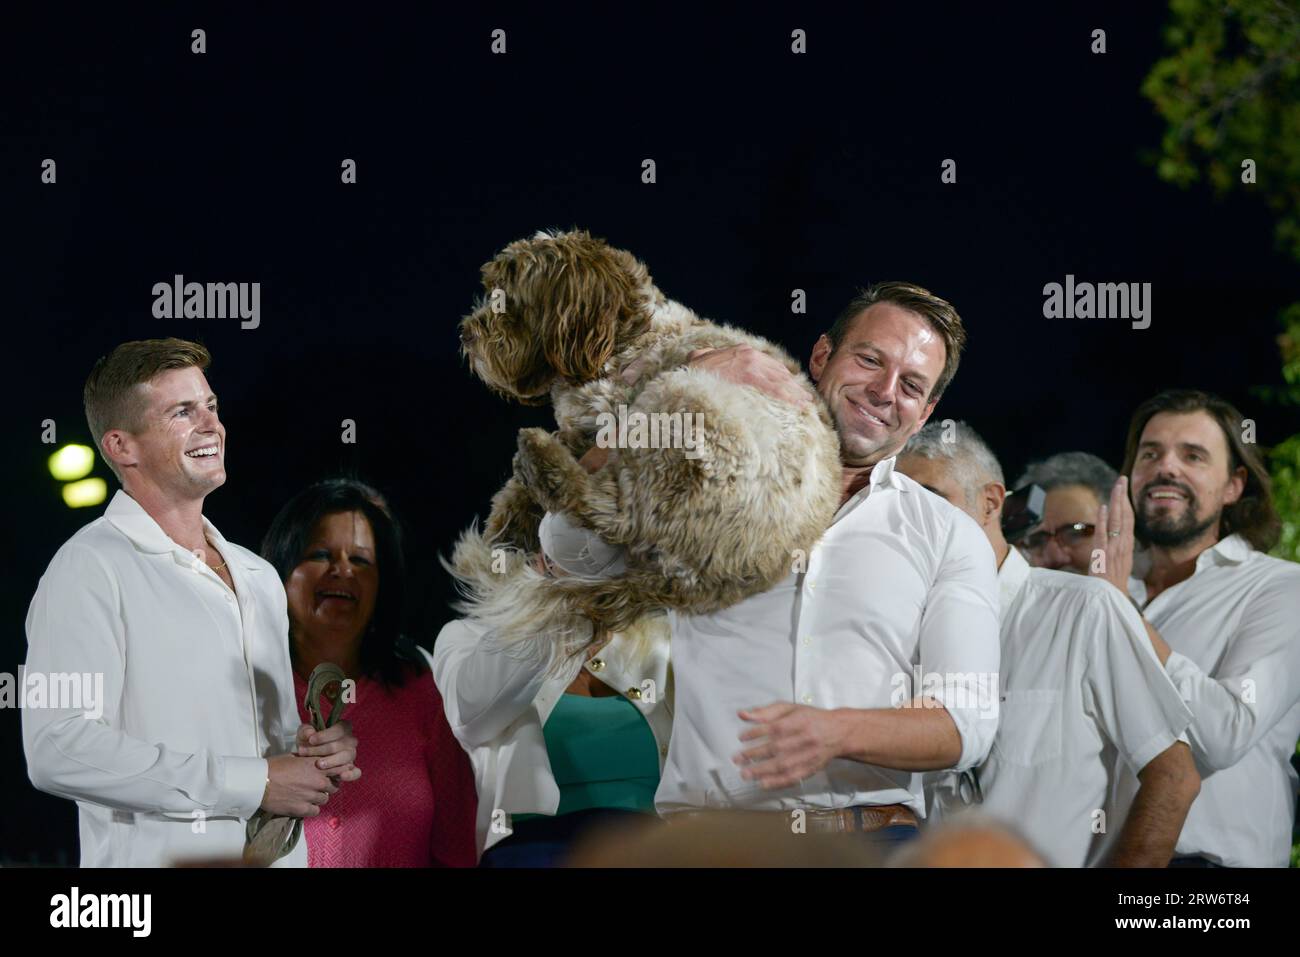 Athens, Greece - 16 September 2023. Stefanos Kasselakis (R) embraces his dog accompanied by his  husband, during his election campaign as a candidate for  the leadership of SYRIZA party. The 35-year-old self-made businessman has ignited a spectrum of reactions as he is young, attractive, affluent, self-made, of Greek descent, multilingual, openly gay, an advocate for animal rights, soon-to-be father and he also promises to bring  a new era of renewal for SYRIZA. Credit: Dimitris Aspiotis/Alamy Stock Photo